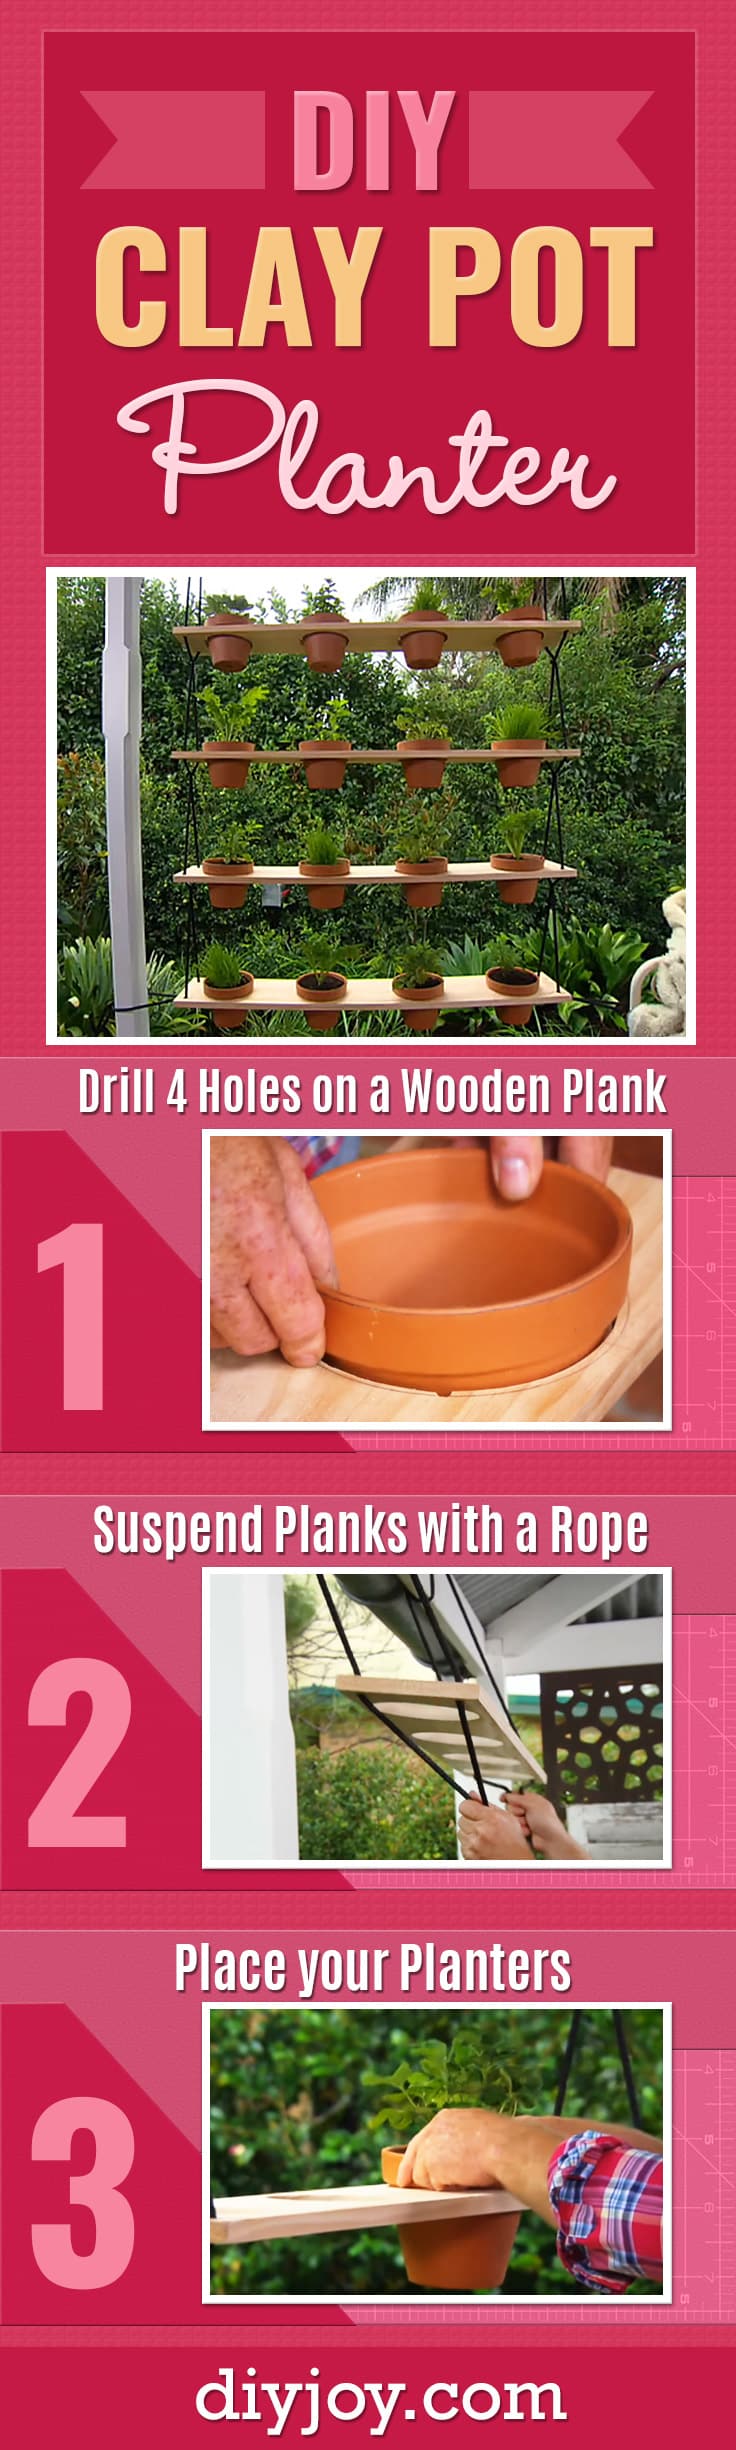 DIY Outdoors Ideas - Do It Yourself Clay Pot Planter Is an Easy Backyard Project for Spring, Summer or Fall Gardening 